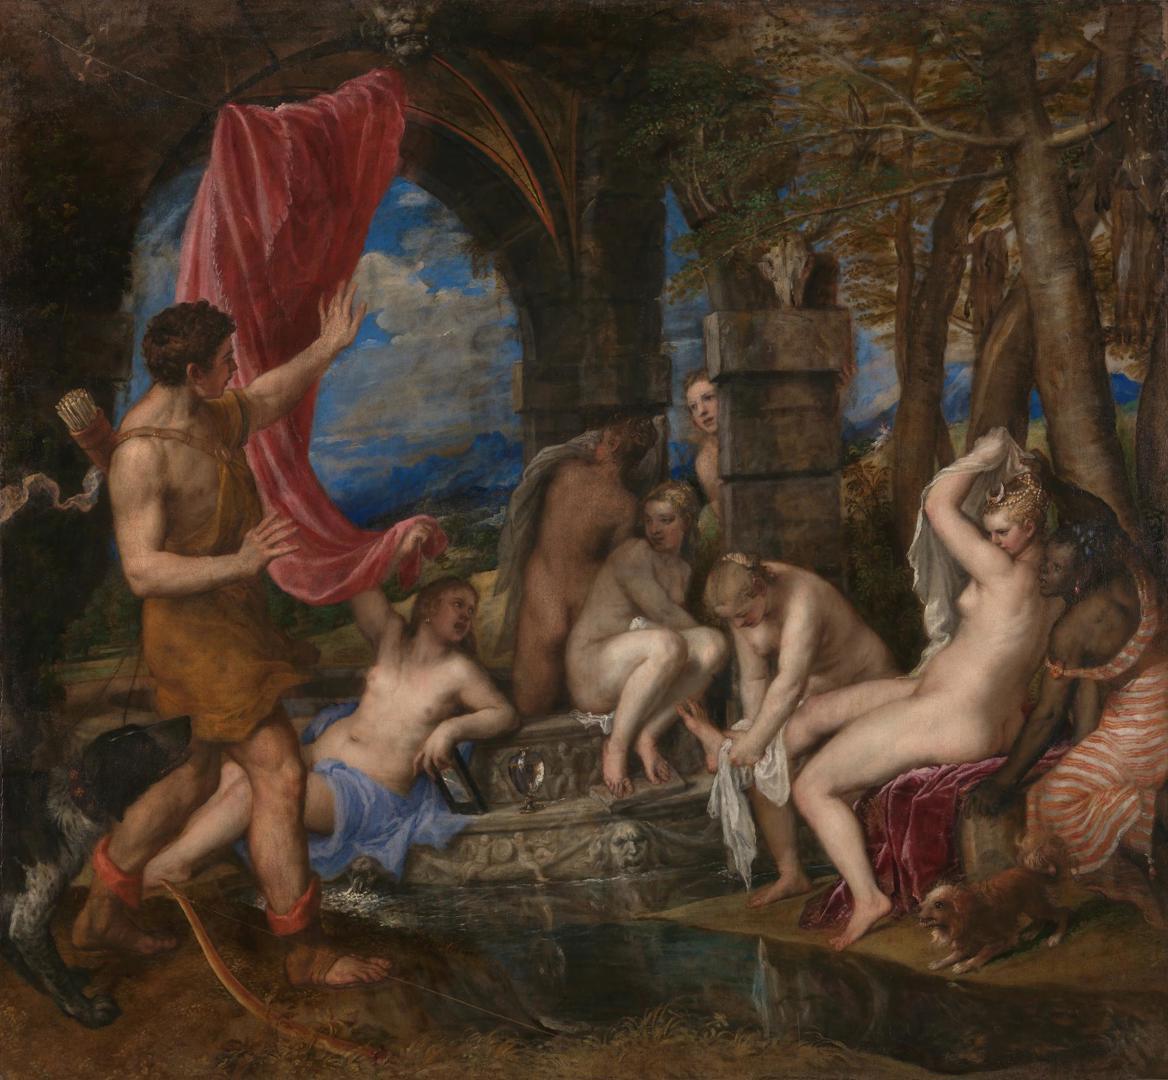 Diana and Actaeon by Titian